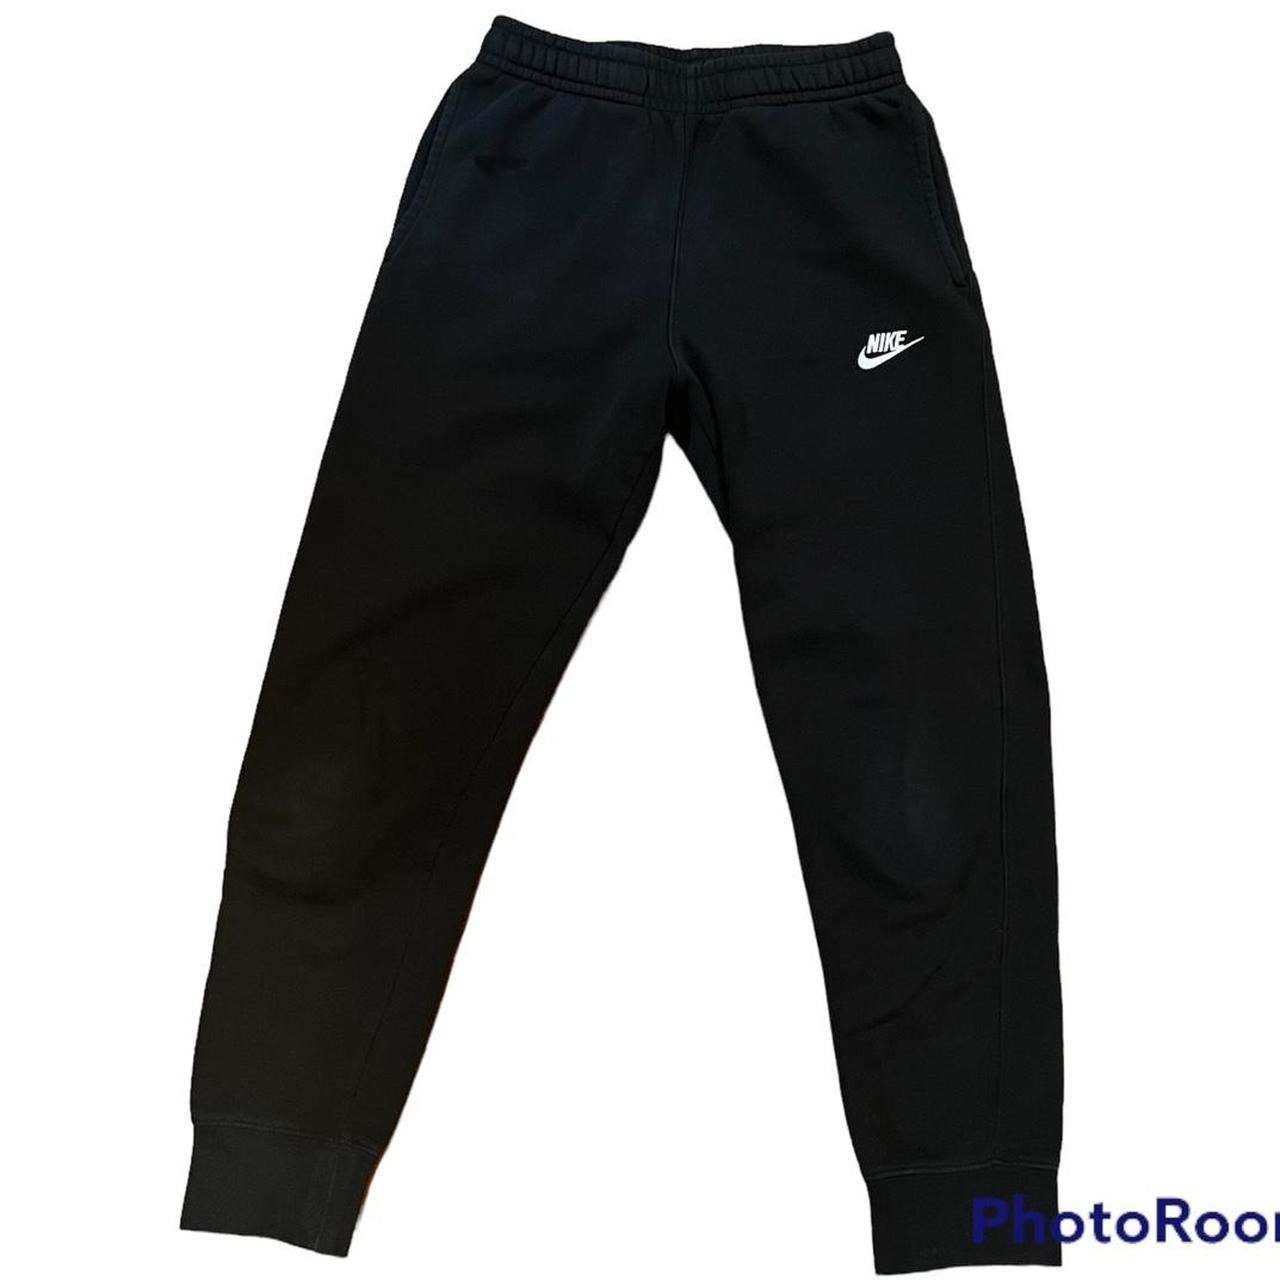 Nike Women's Black and White Joggers-tracksuits (2)